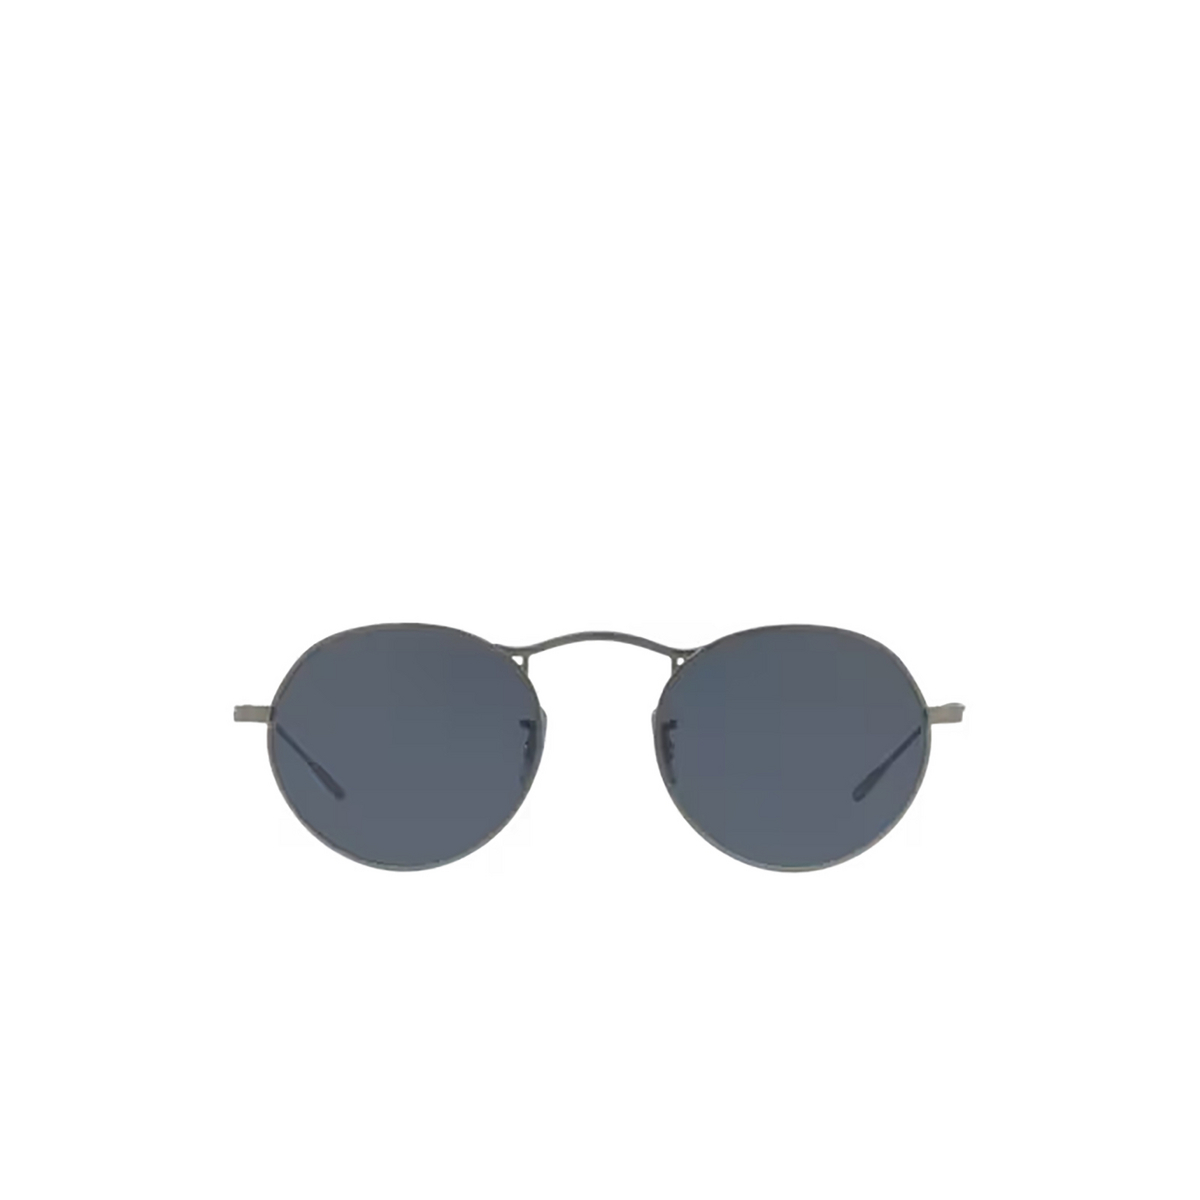 Oliver Peoples M-4 30TH Sunglasses 5244R5 Antique Pewter - front view